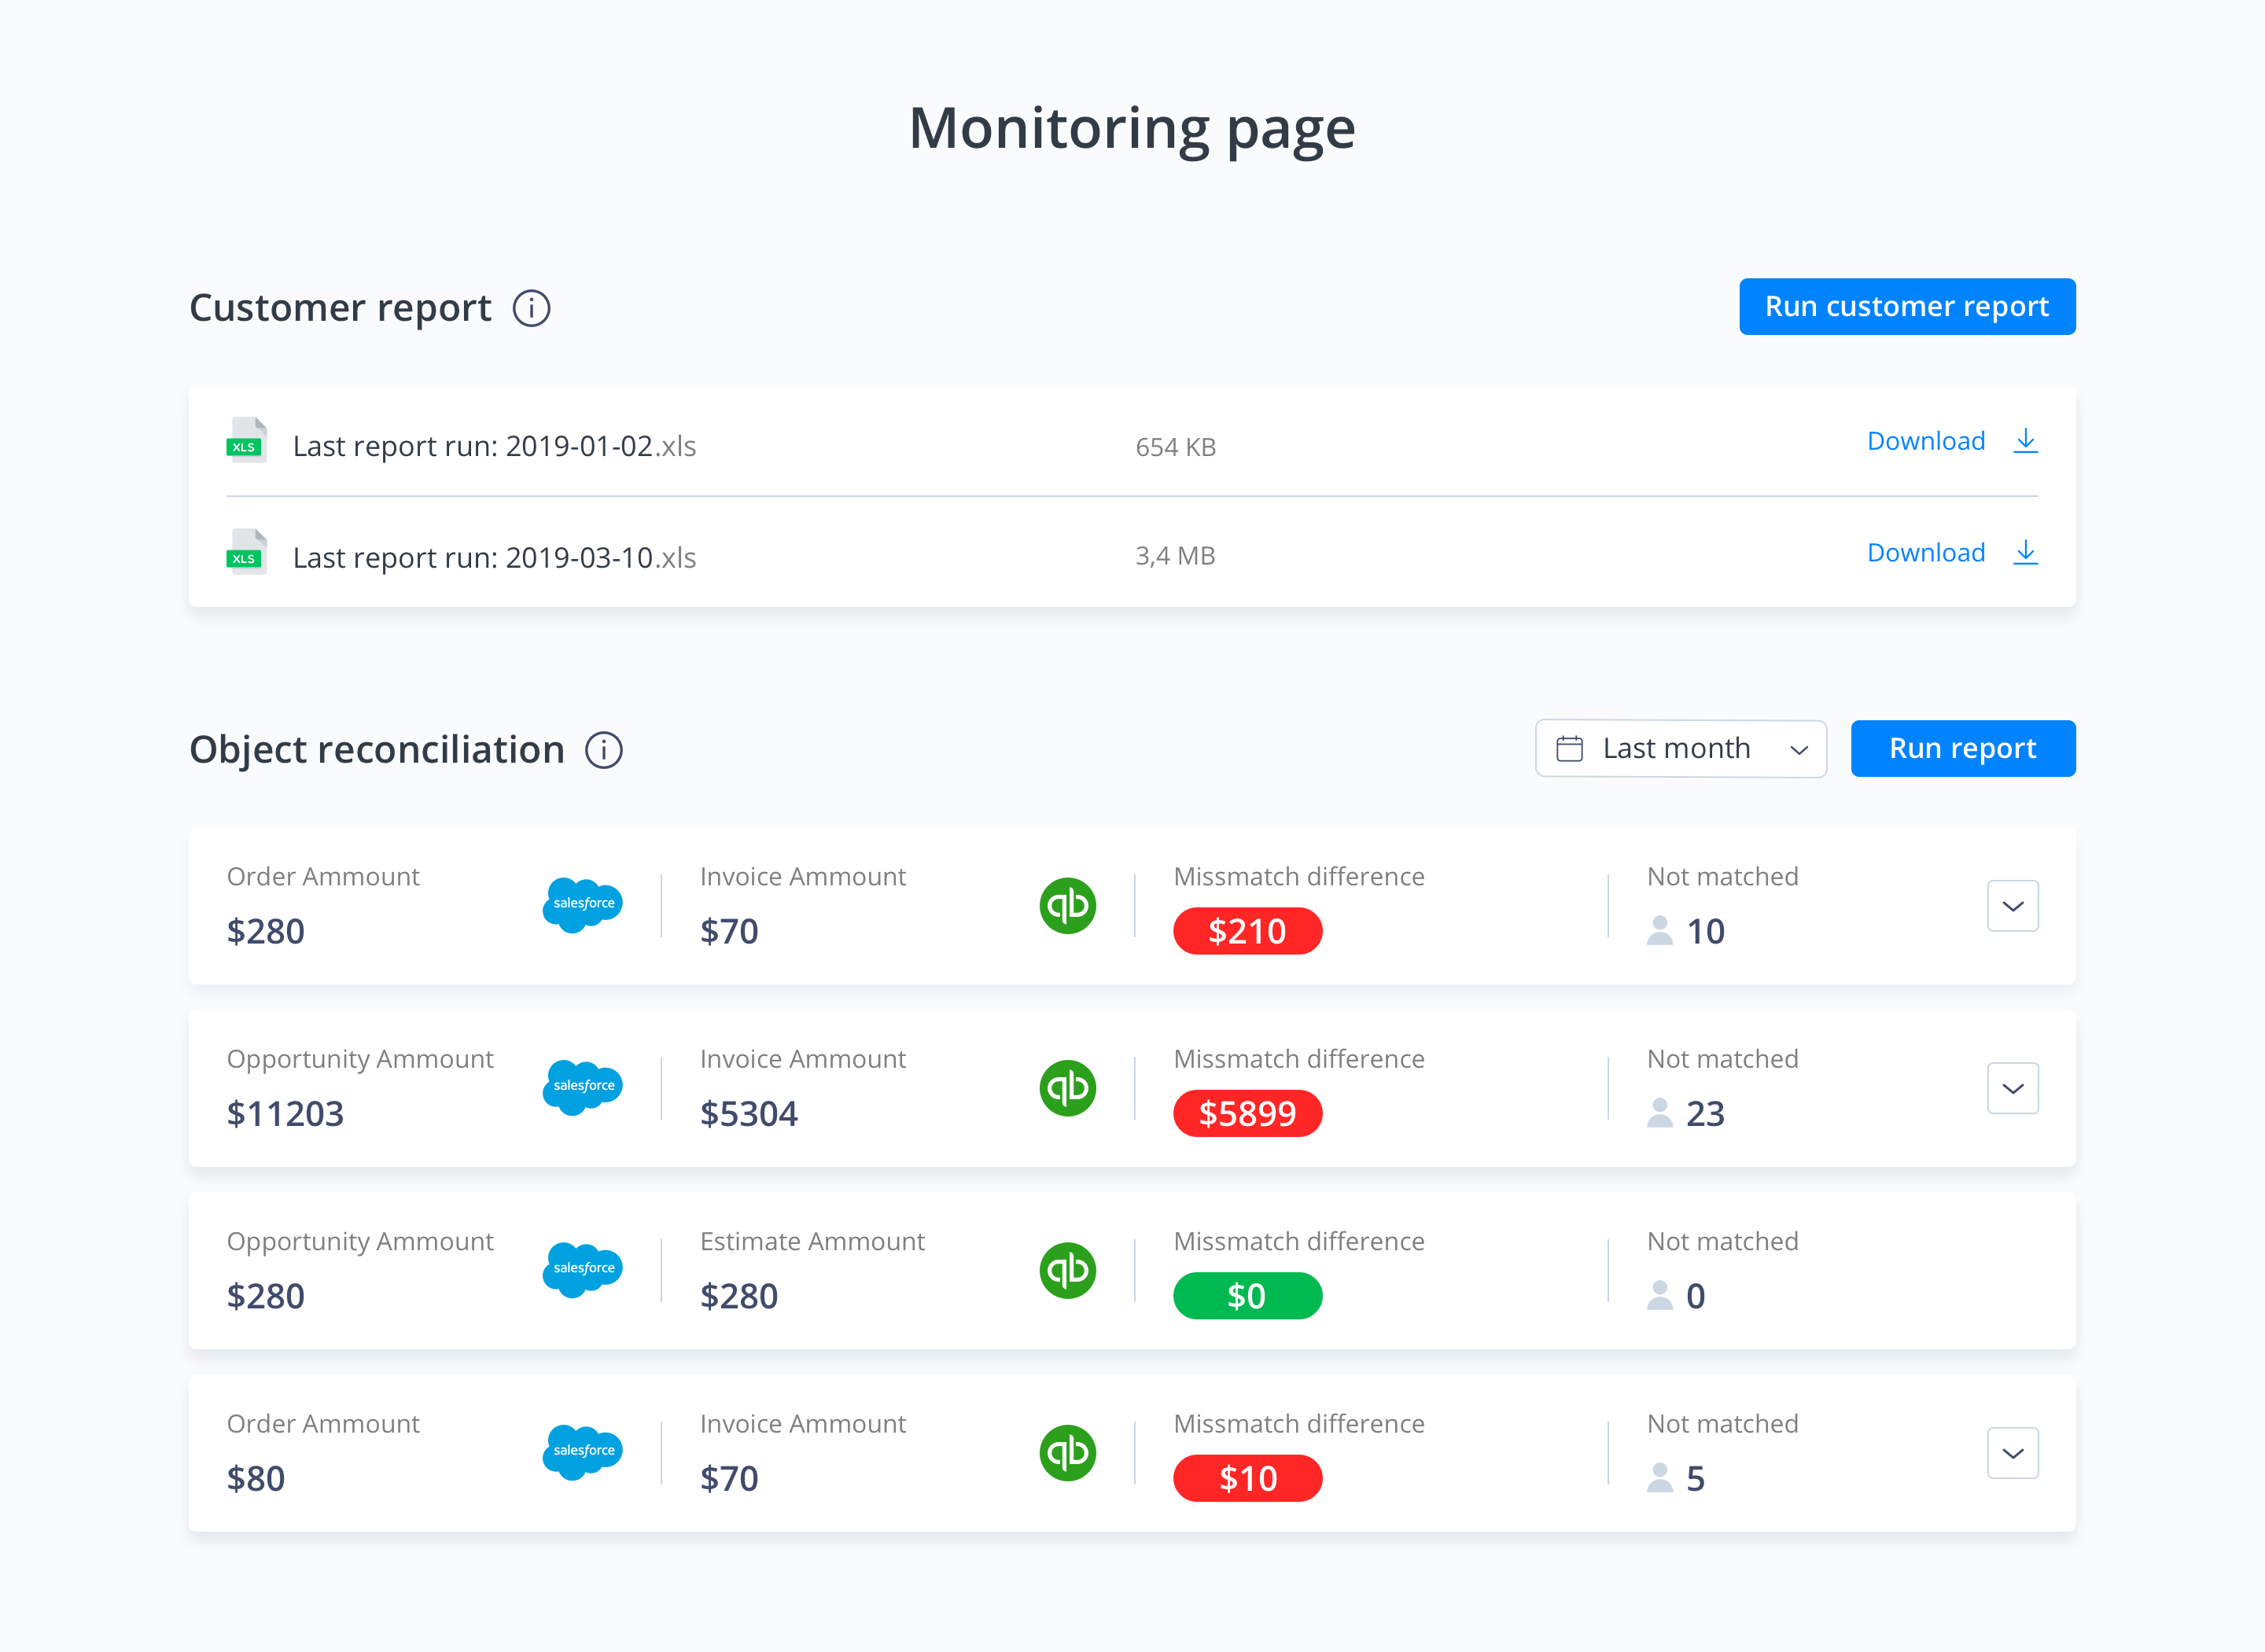 quickbook and salesforce reports monitoring page